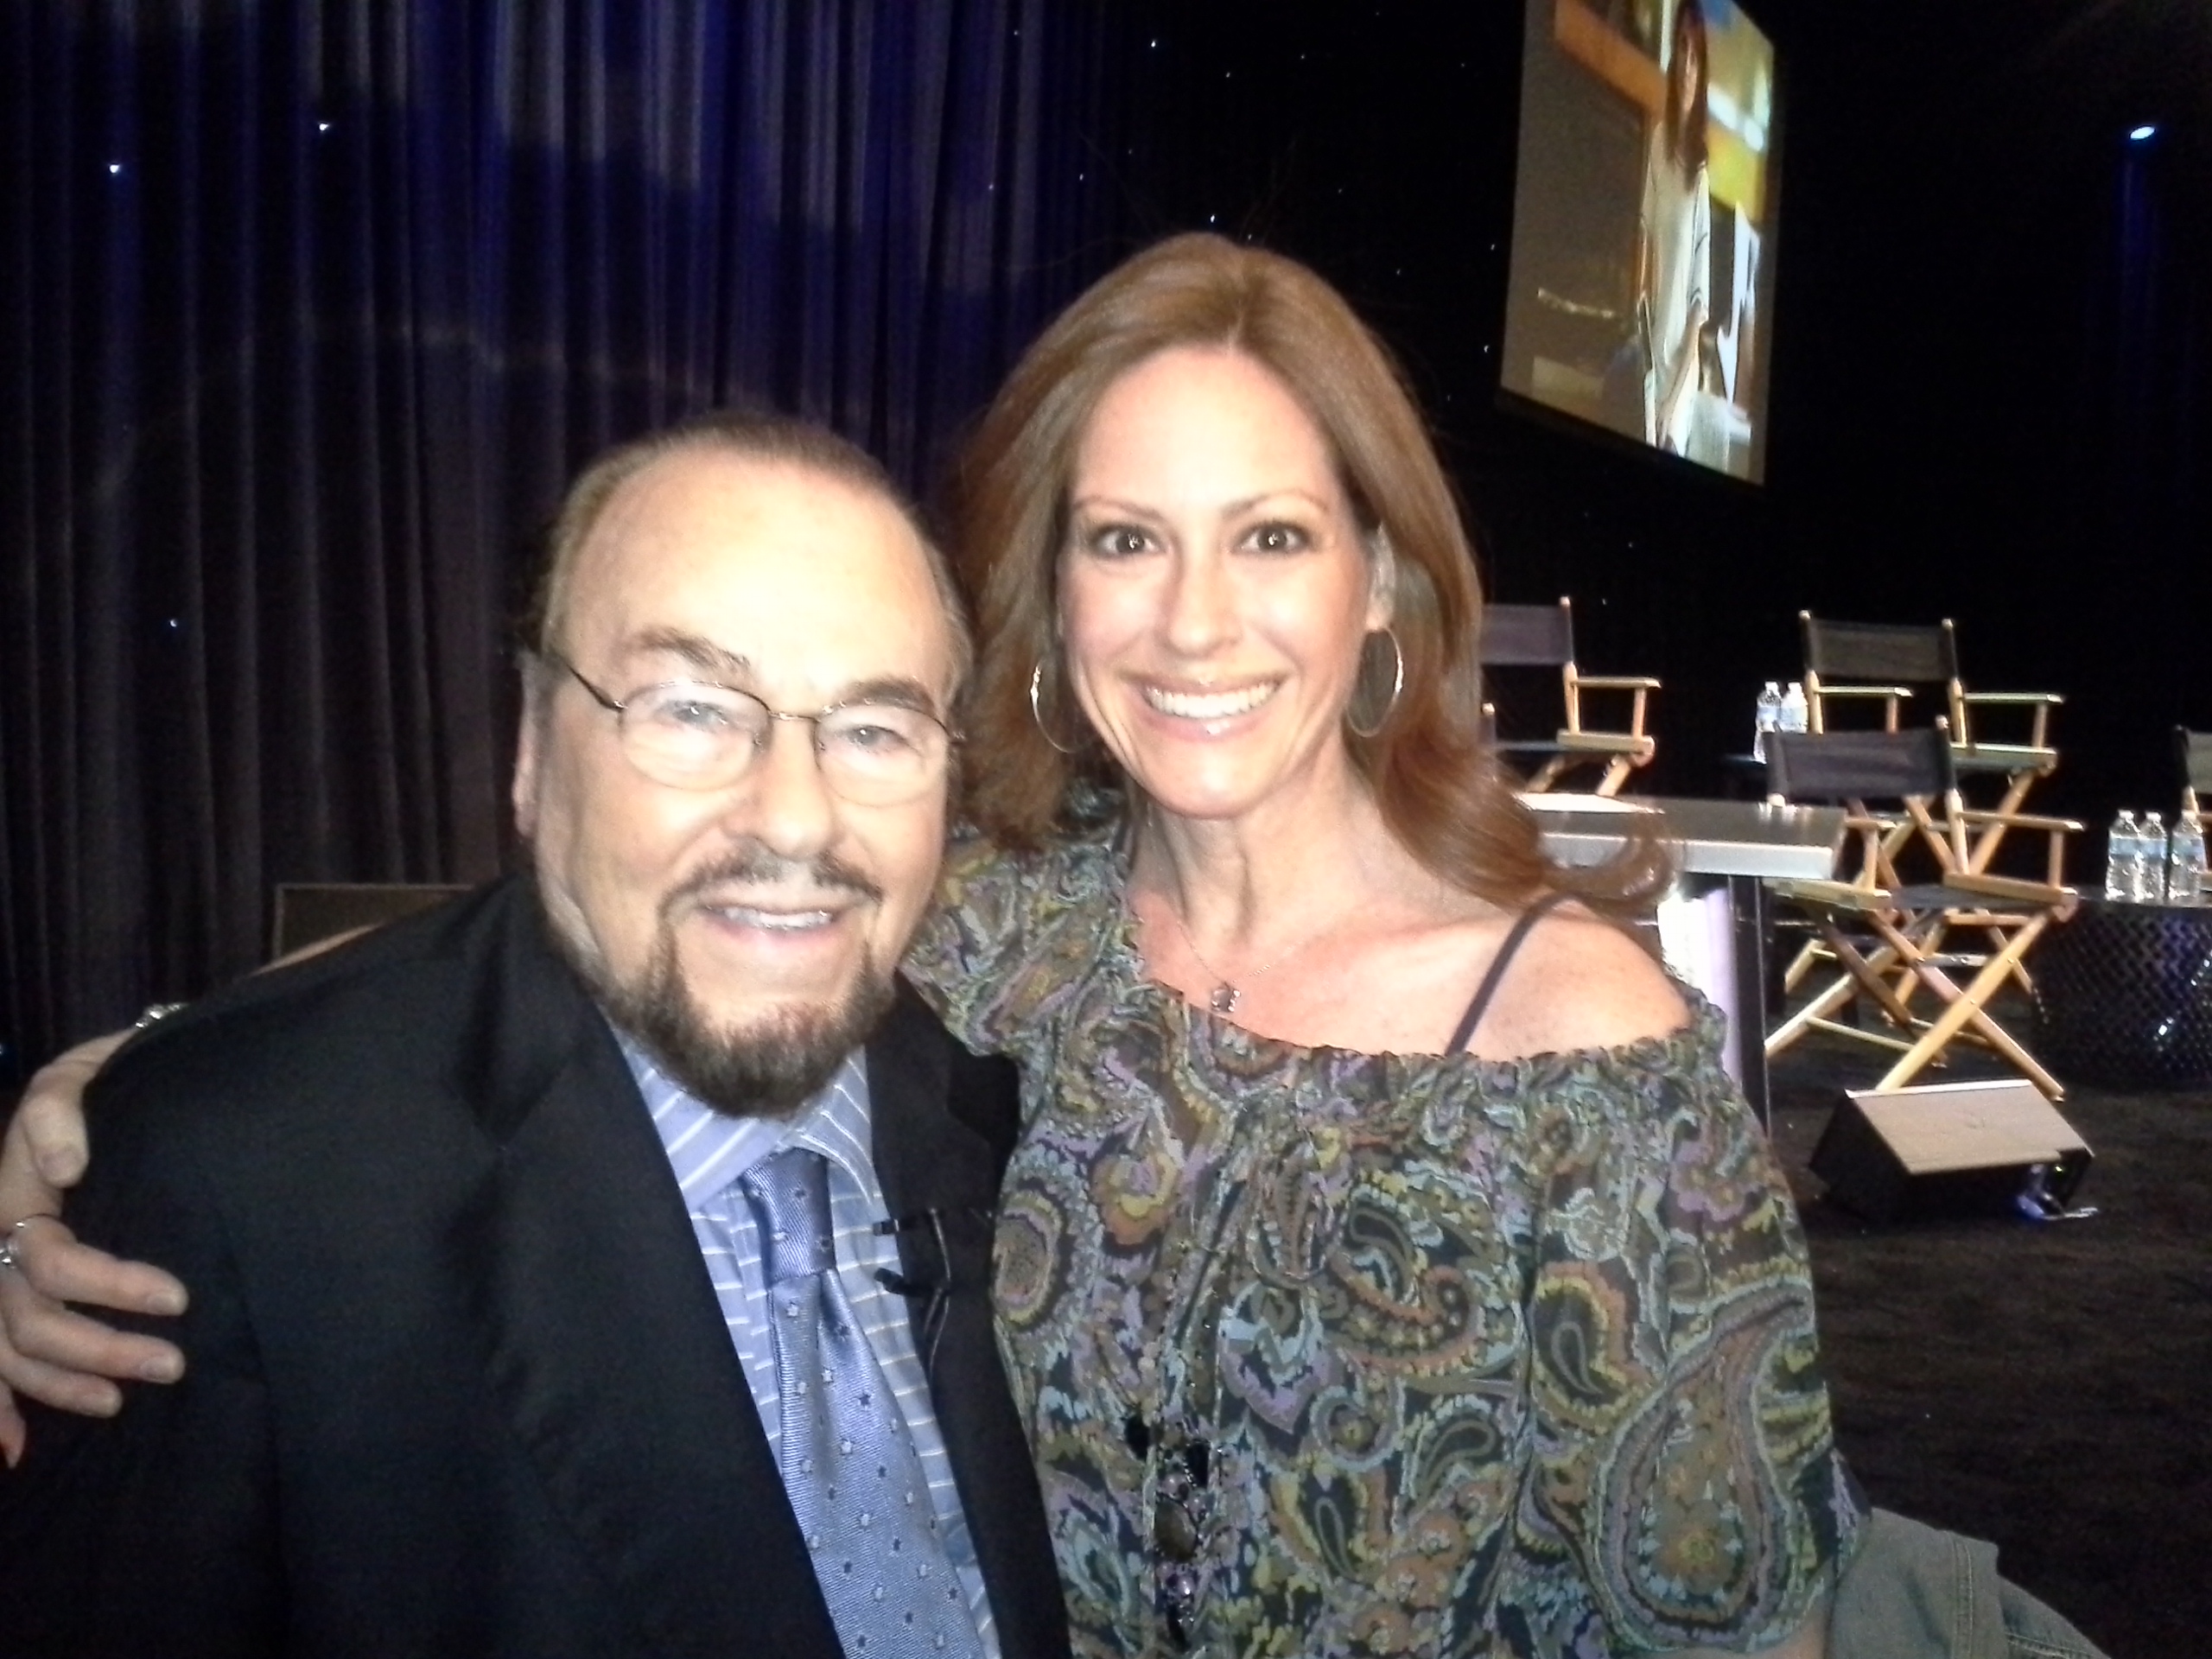 At a taping of Inside the Actors Studio with the wonderful James Lipton.